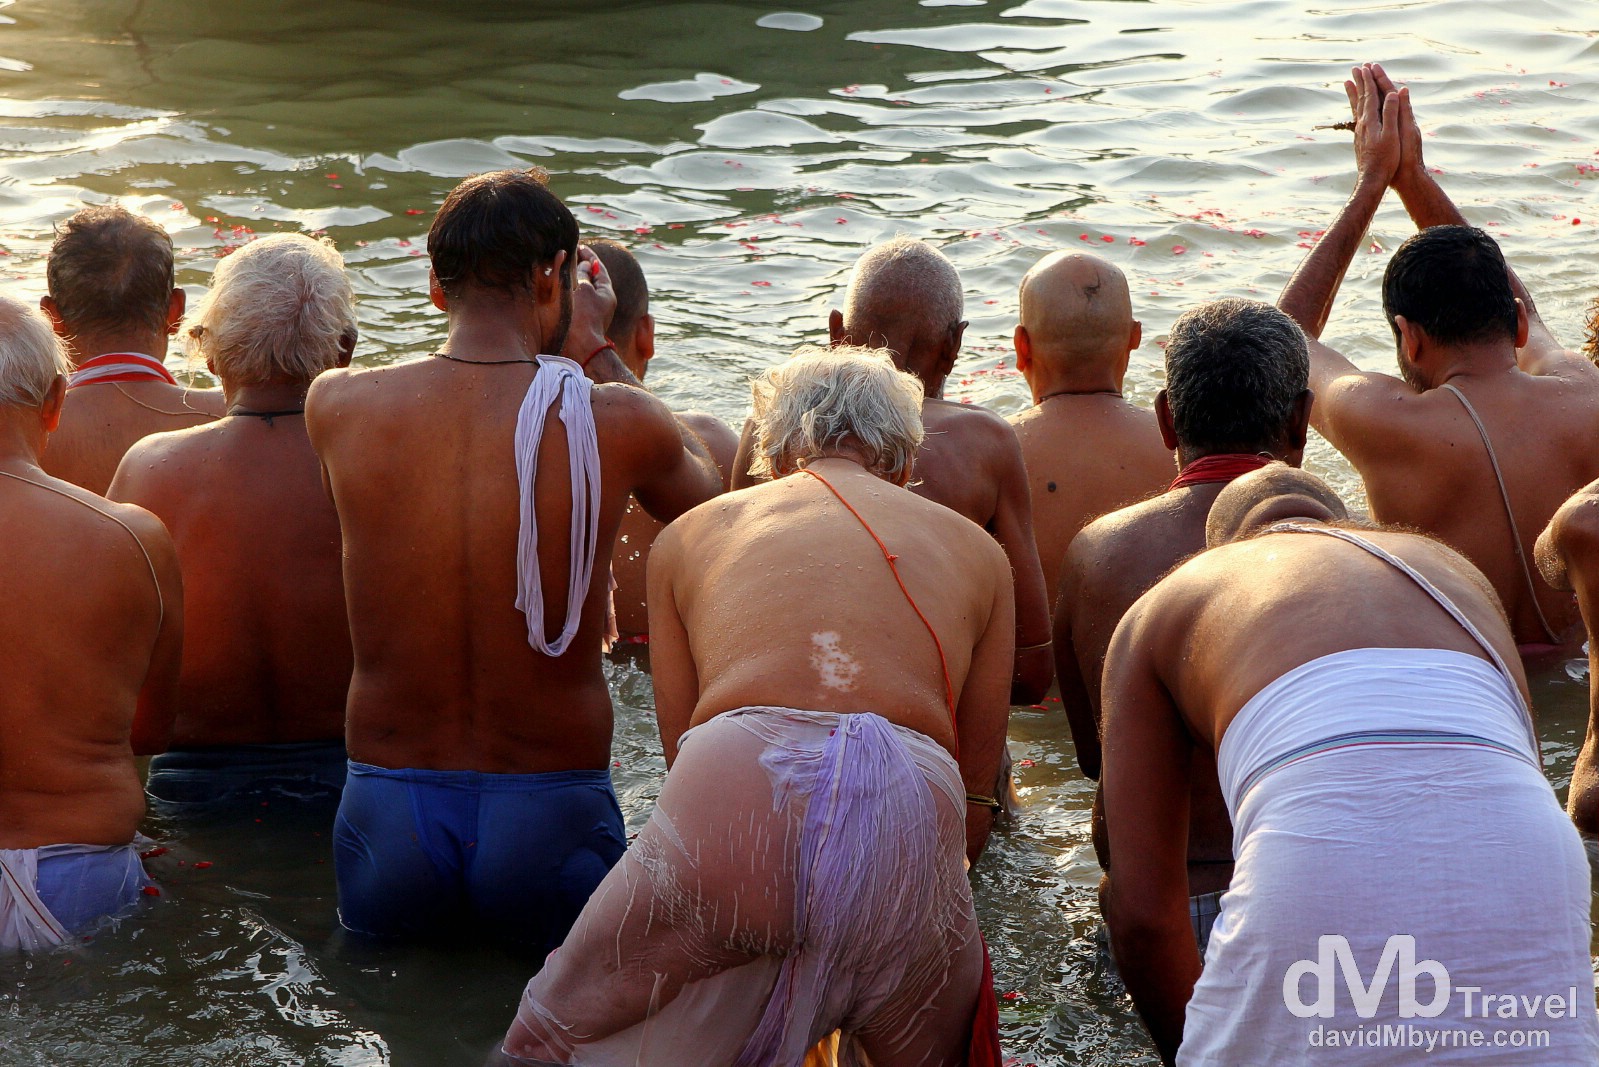 Early morning ritual bathing in the River Ganges by the Dashaswamedh Ghat in Varanasi, Uttar Pradesh, India. October 13th 2012.